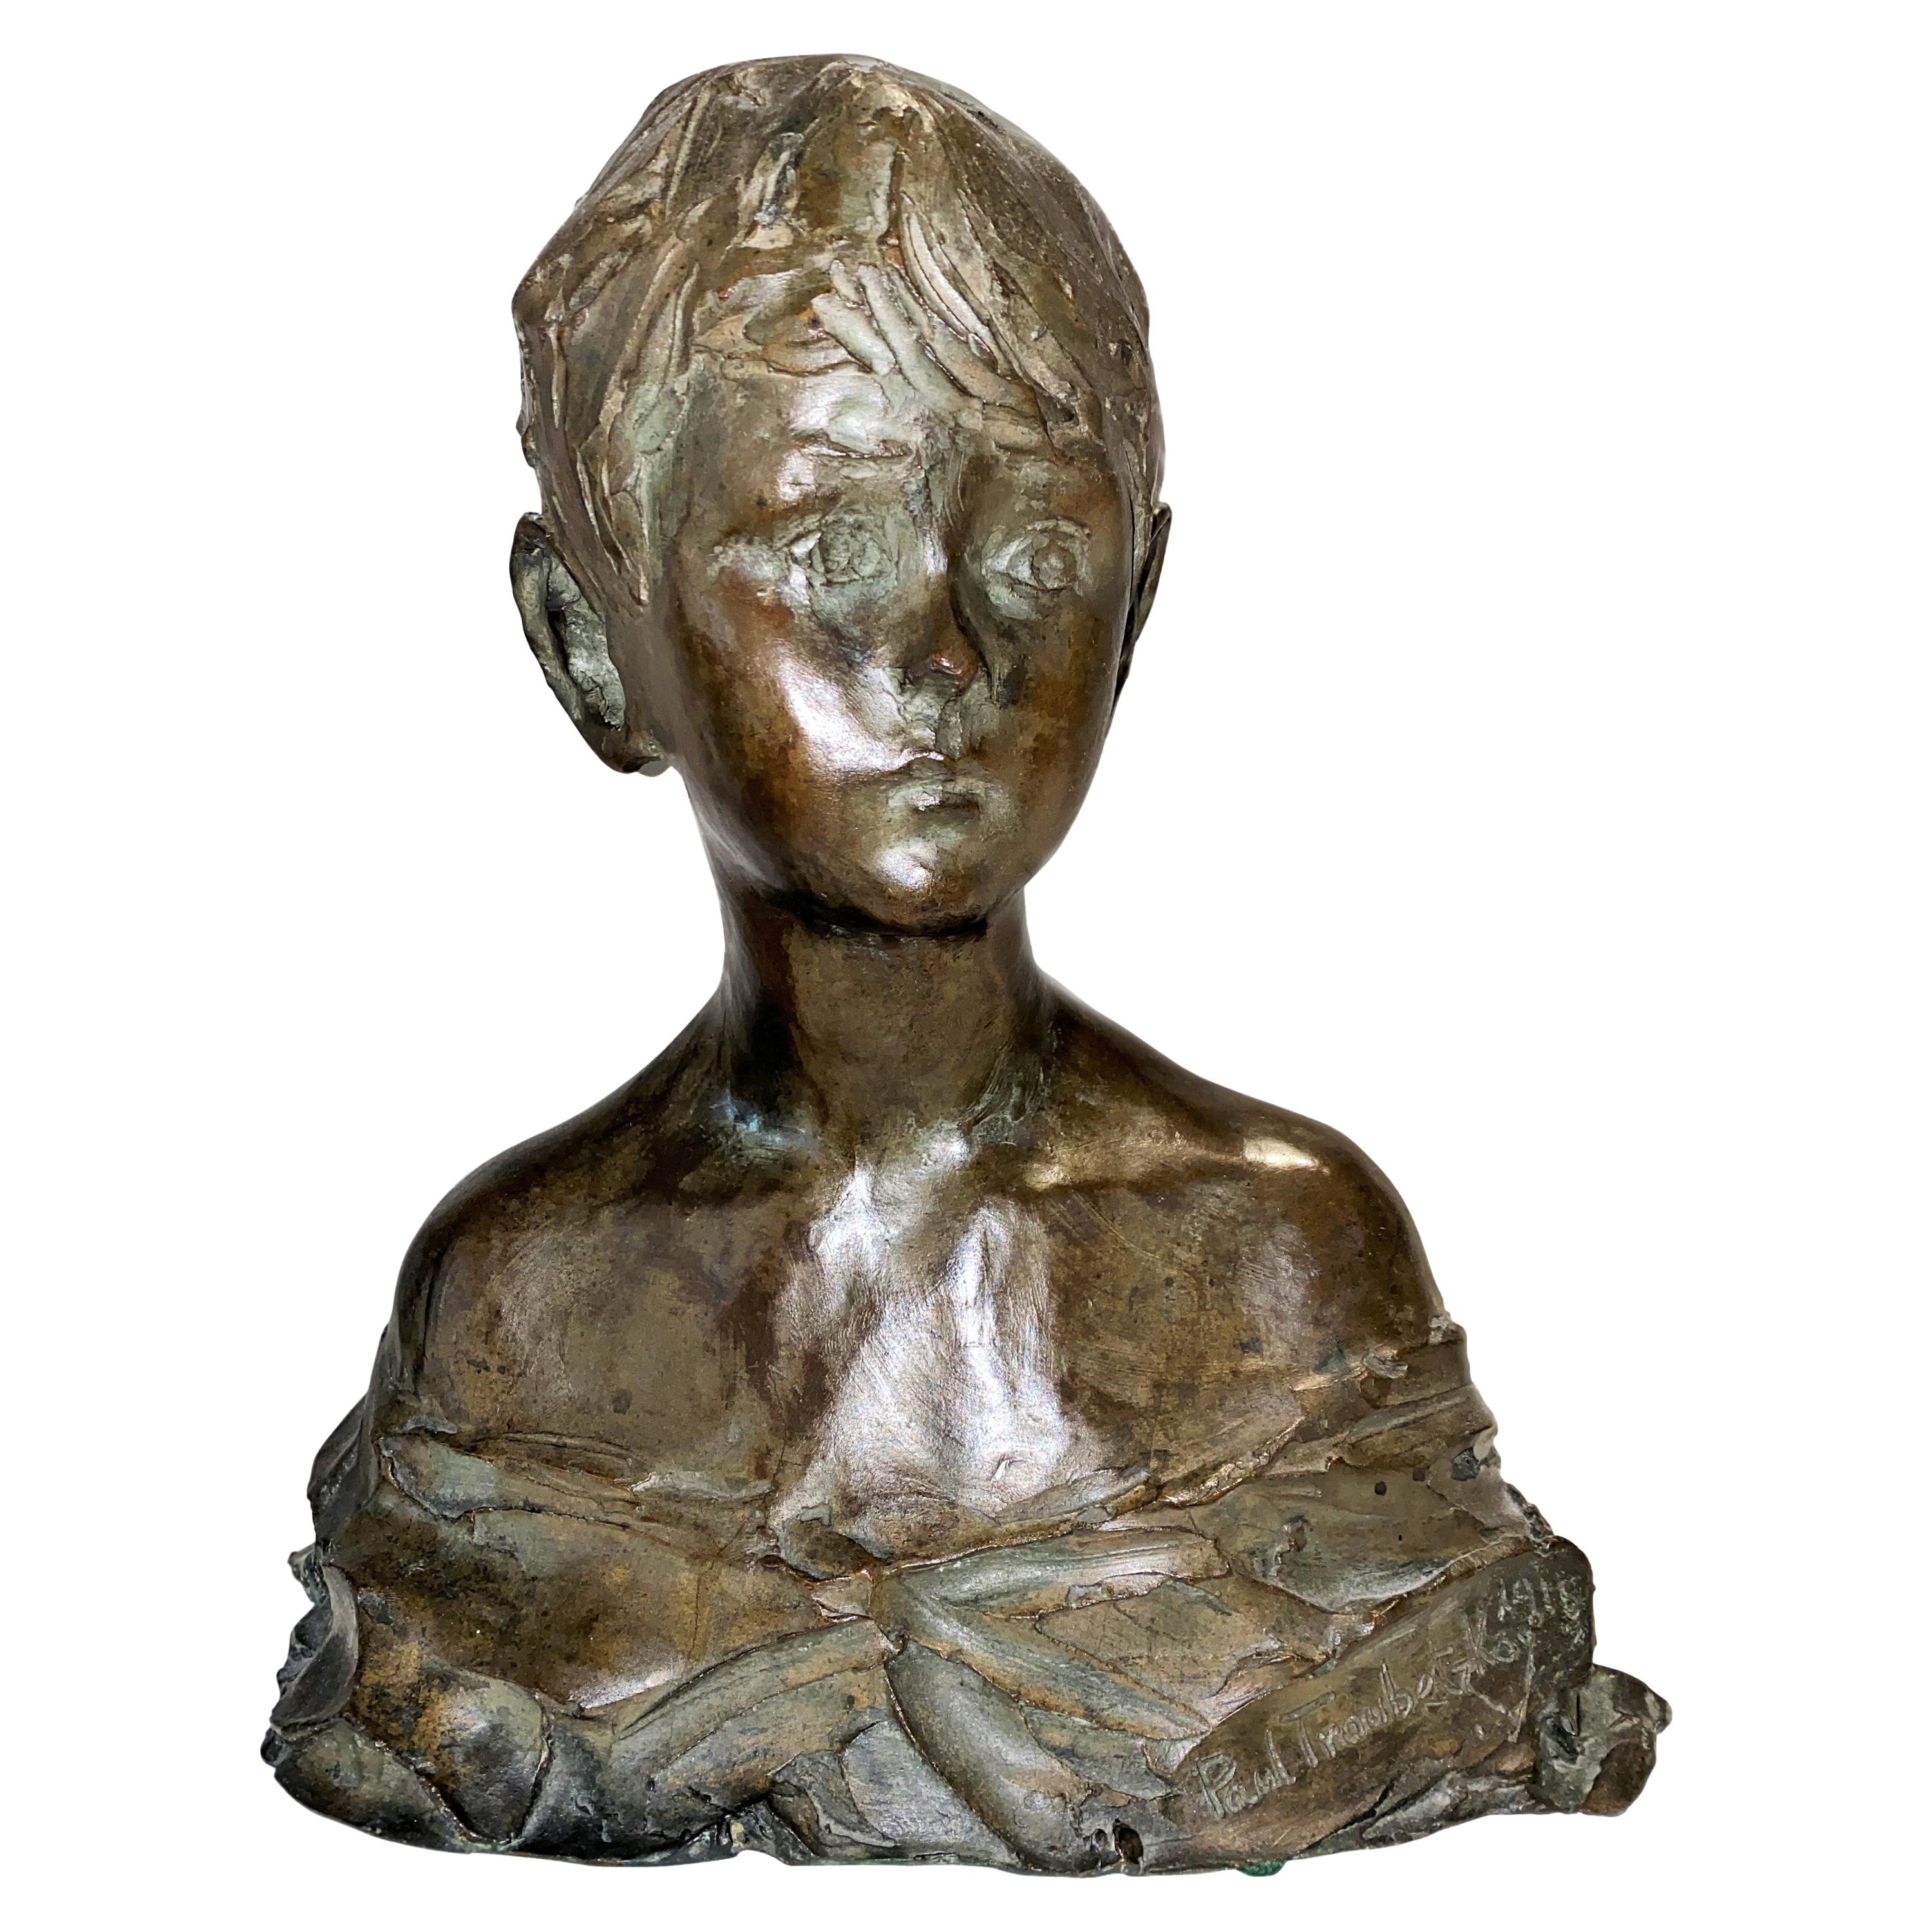 Prince Paolo Troubetzkoy, Bust of a Boy, Impressionist Bronze Sculpture, 1915